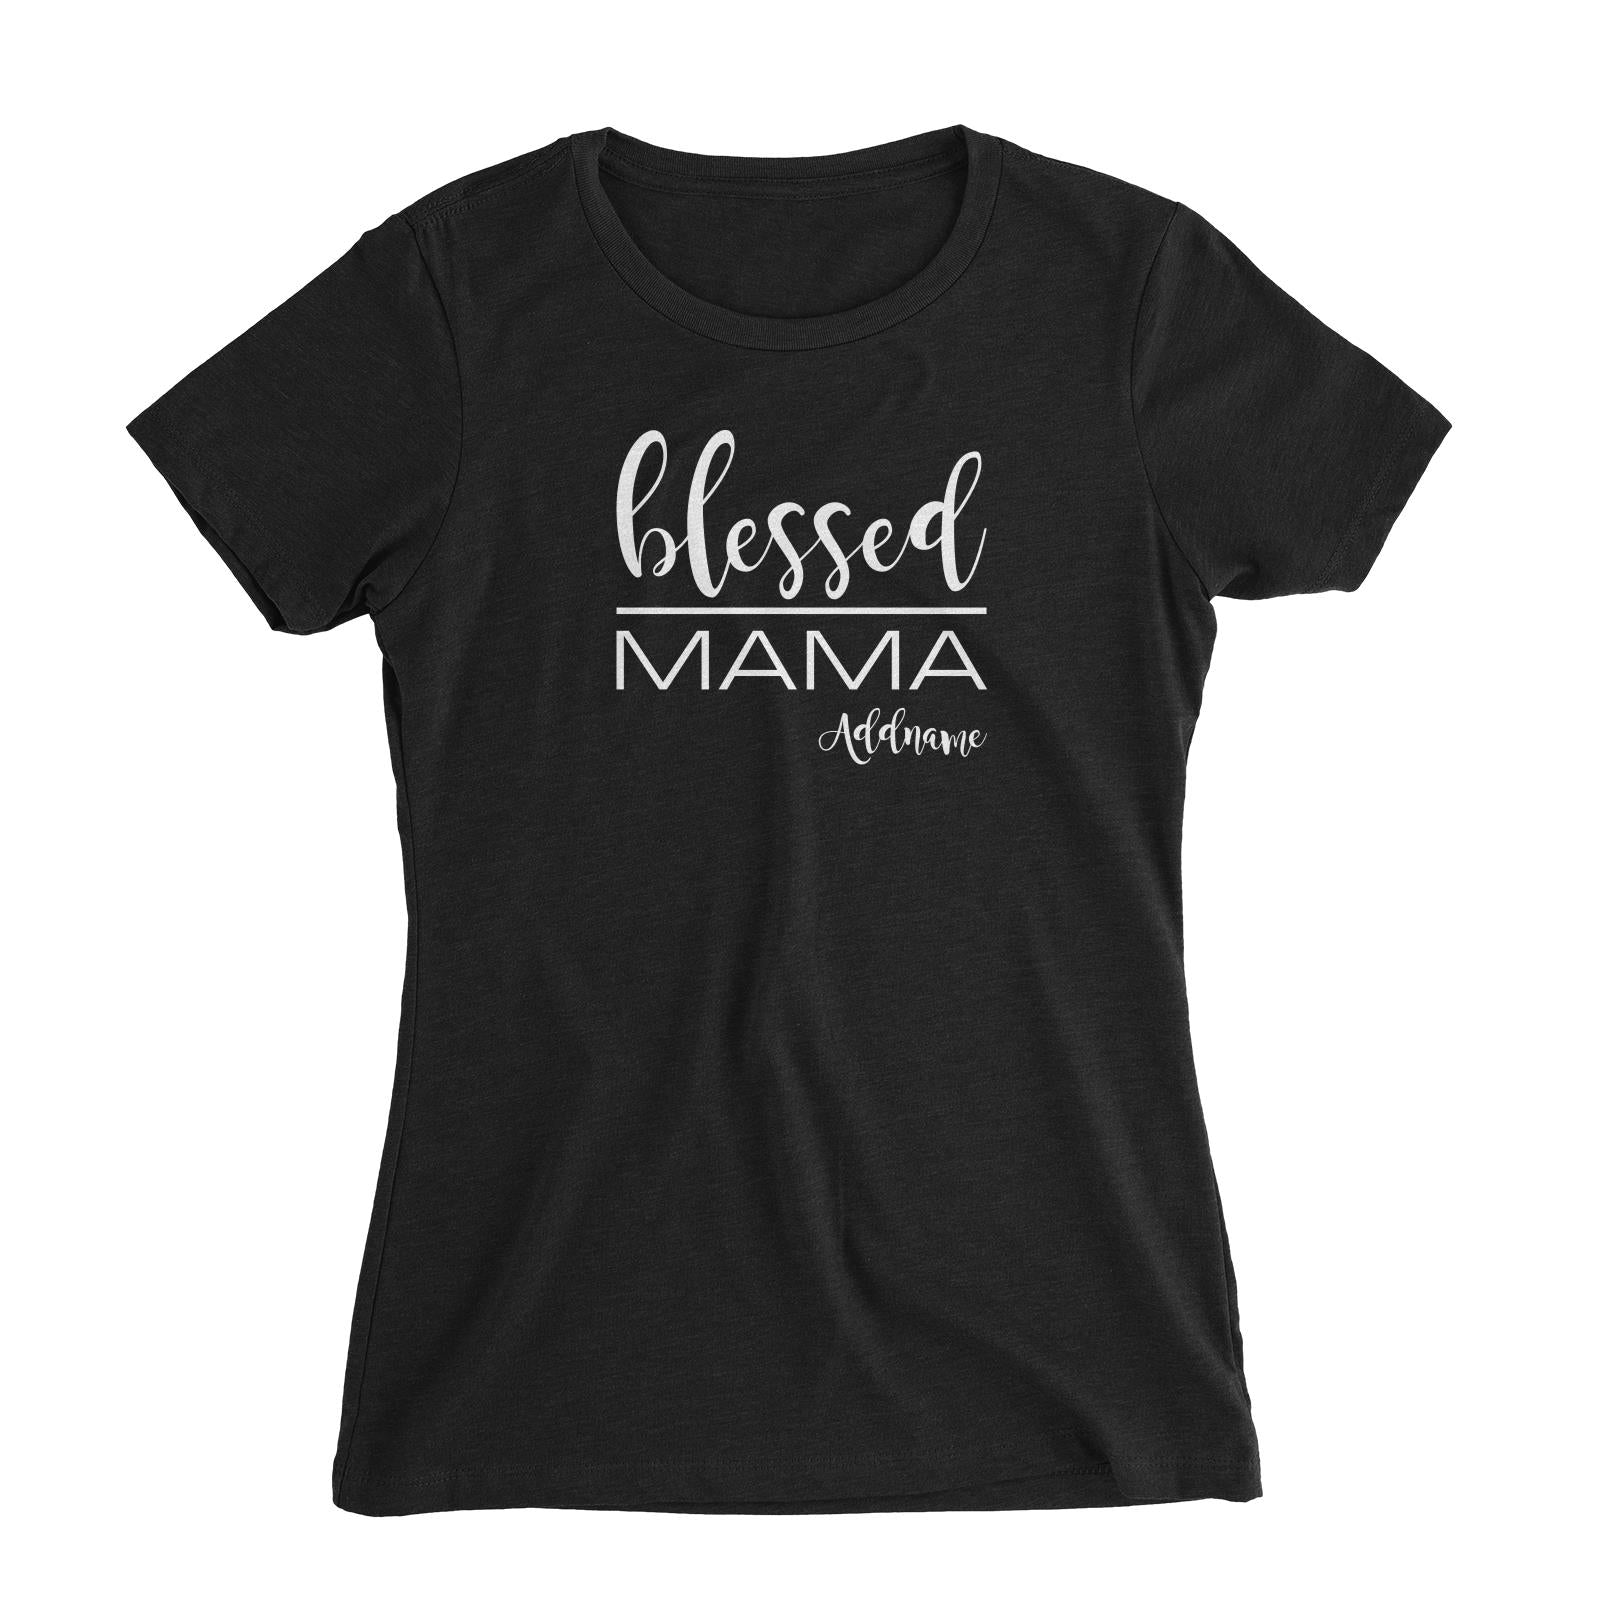 Blessed Mama Women's Slim Fit T-Shirt